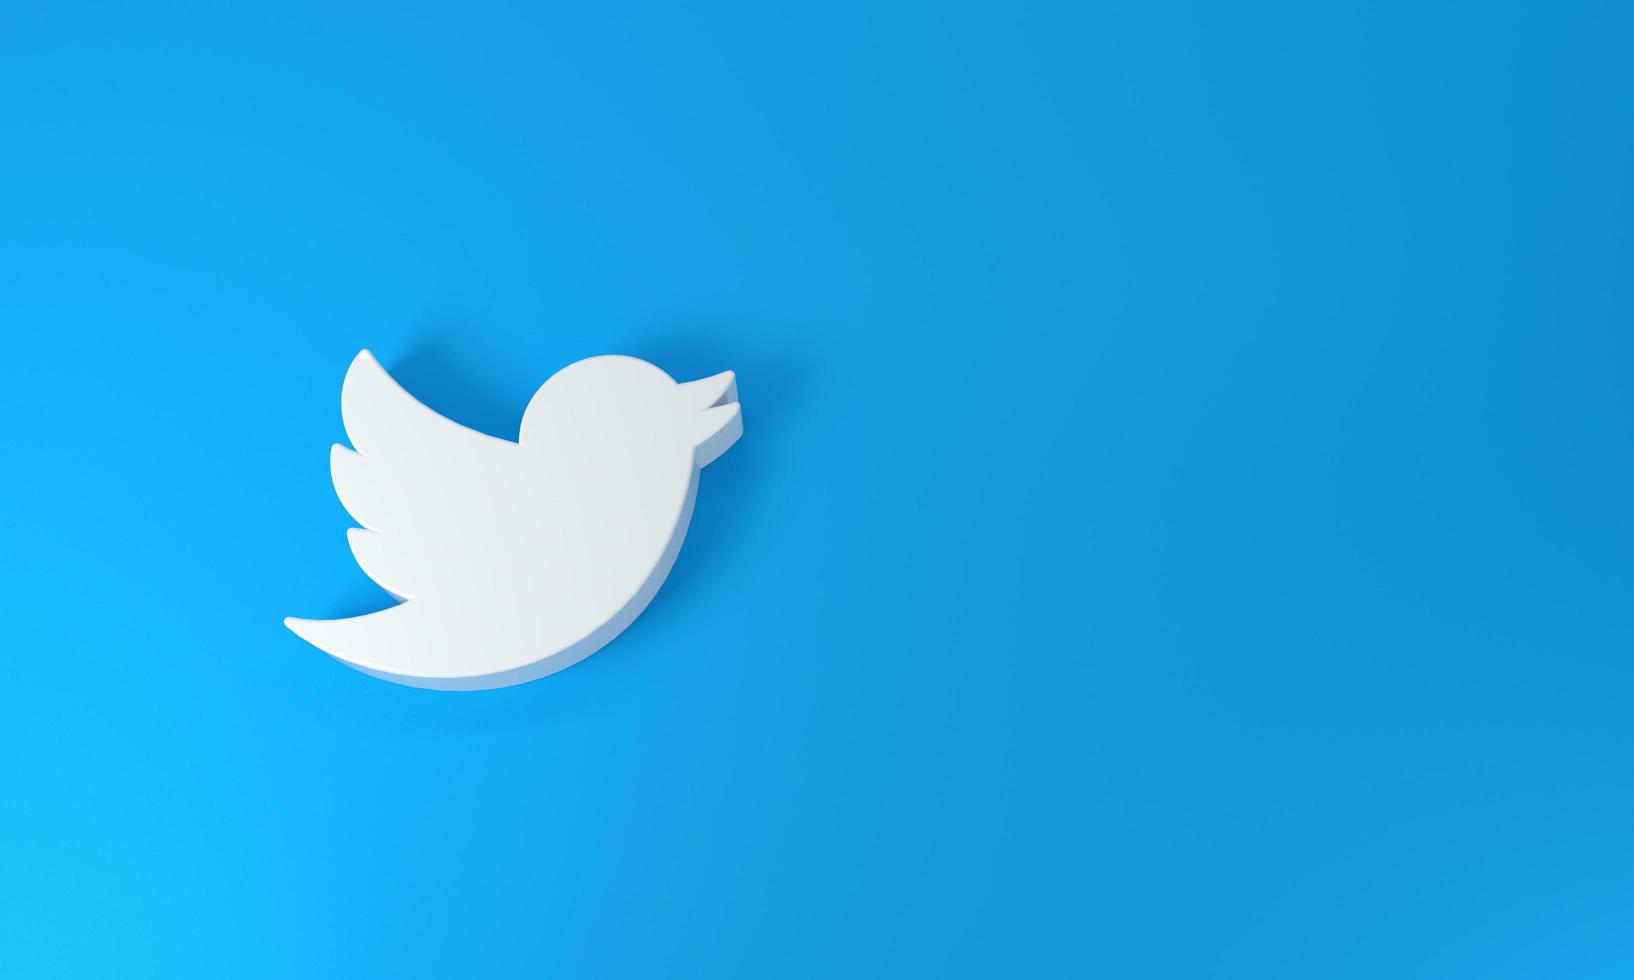 Twitter logo on blue background - top view. Madrid, Spain, 2022 photo